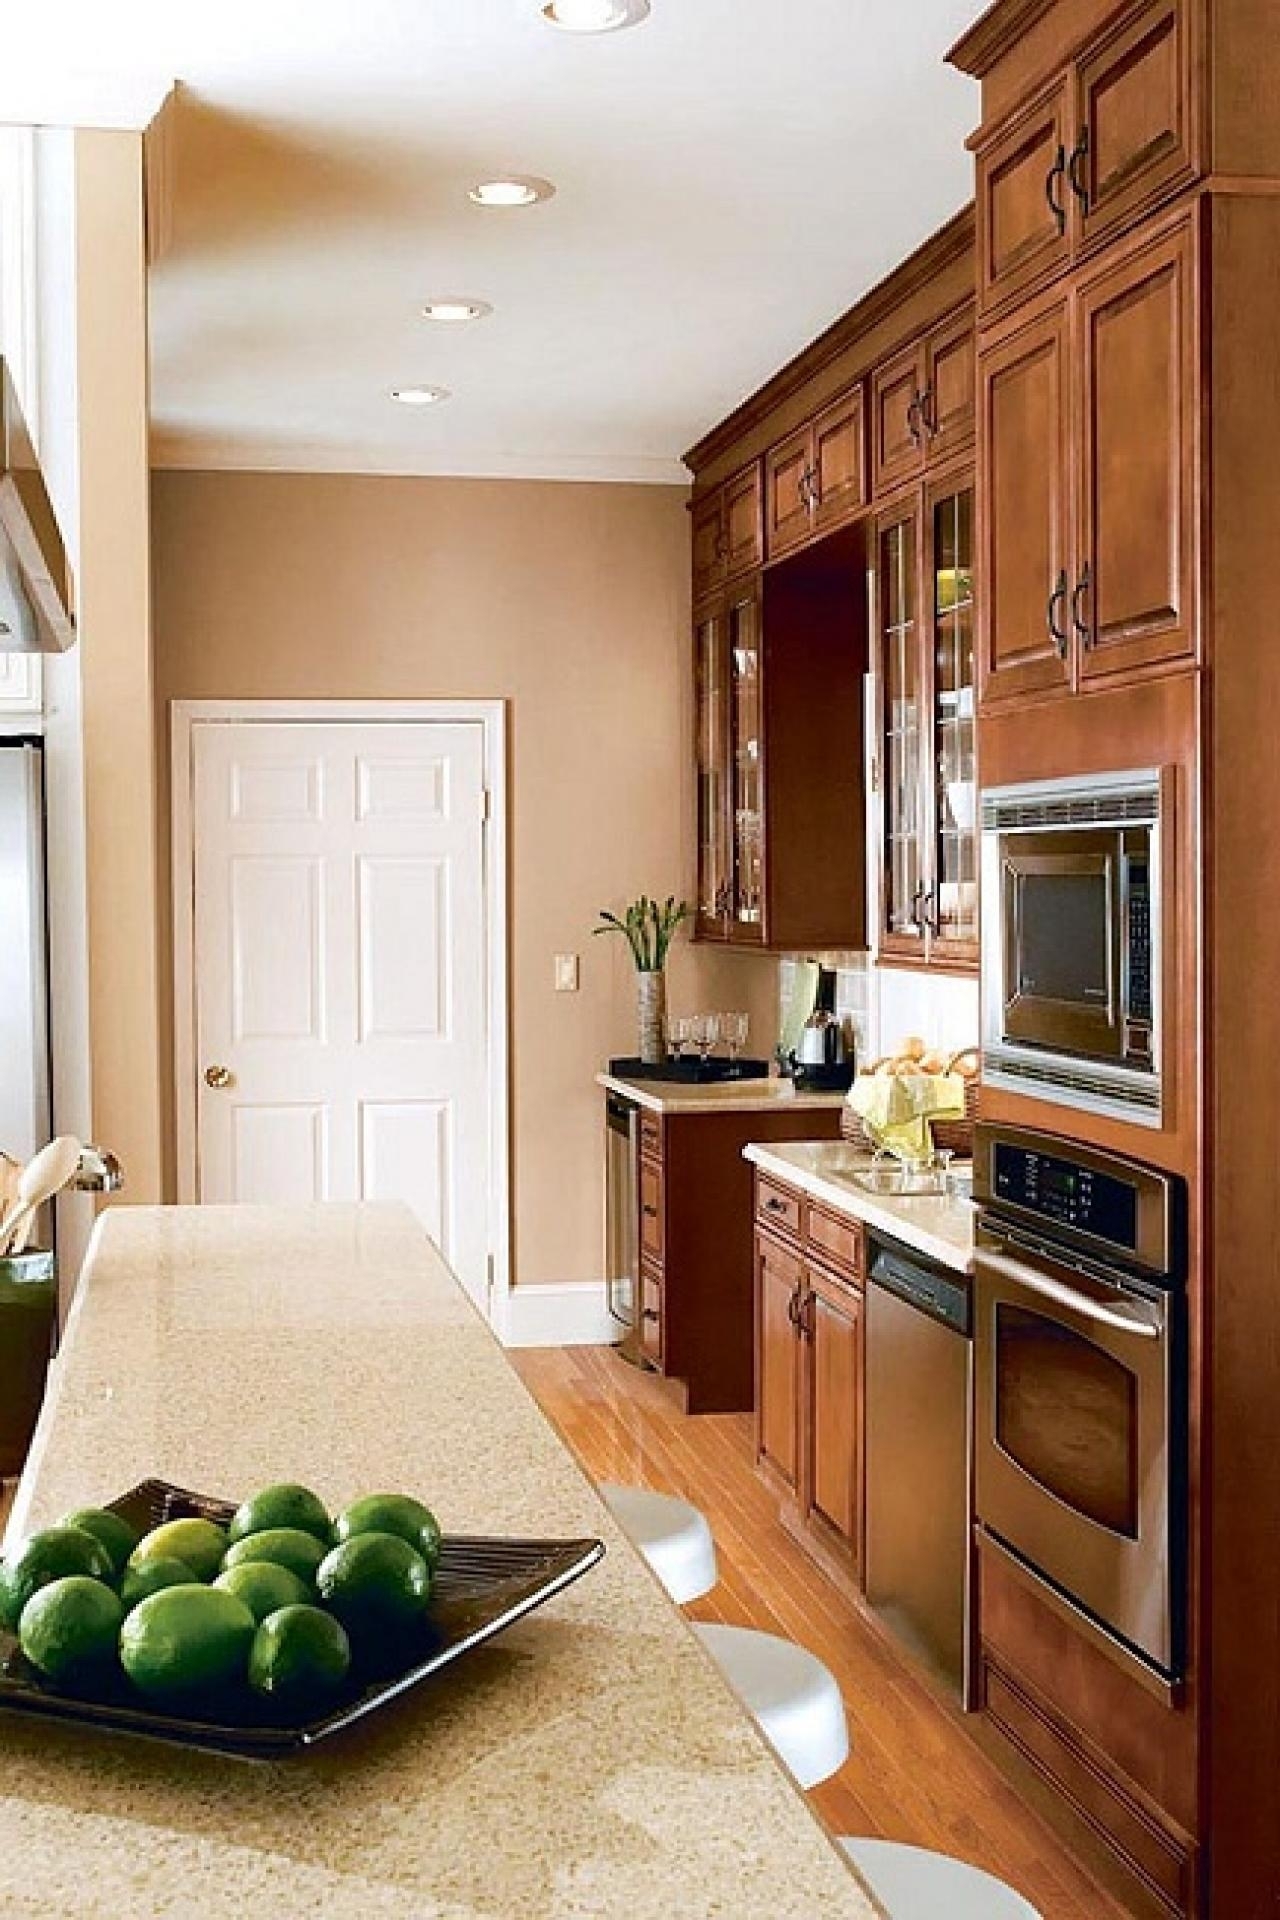 10 Lovable Kitchen Color Ideas With Dark Cabinets %name 2022